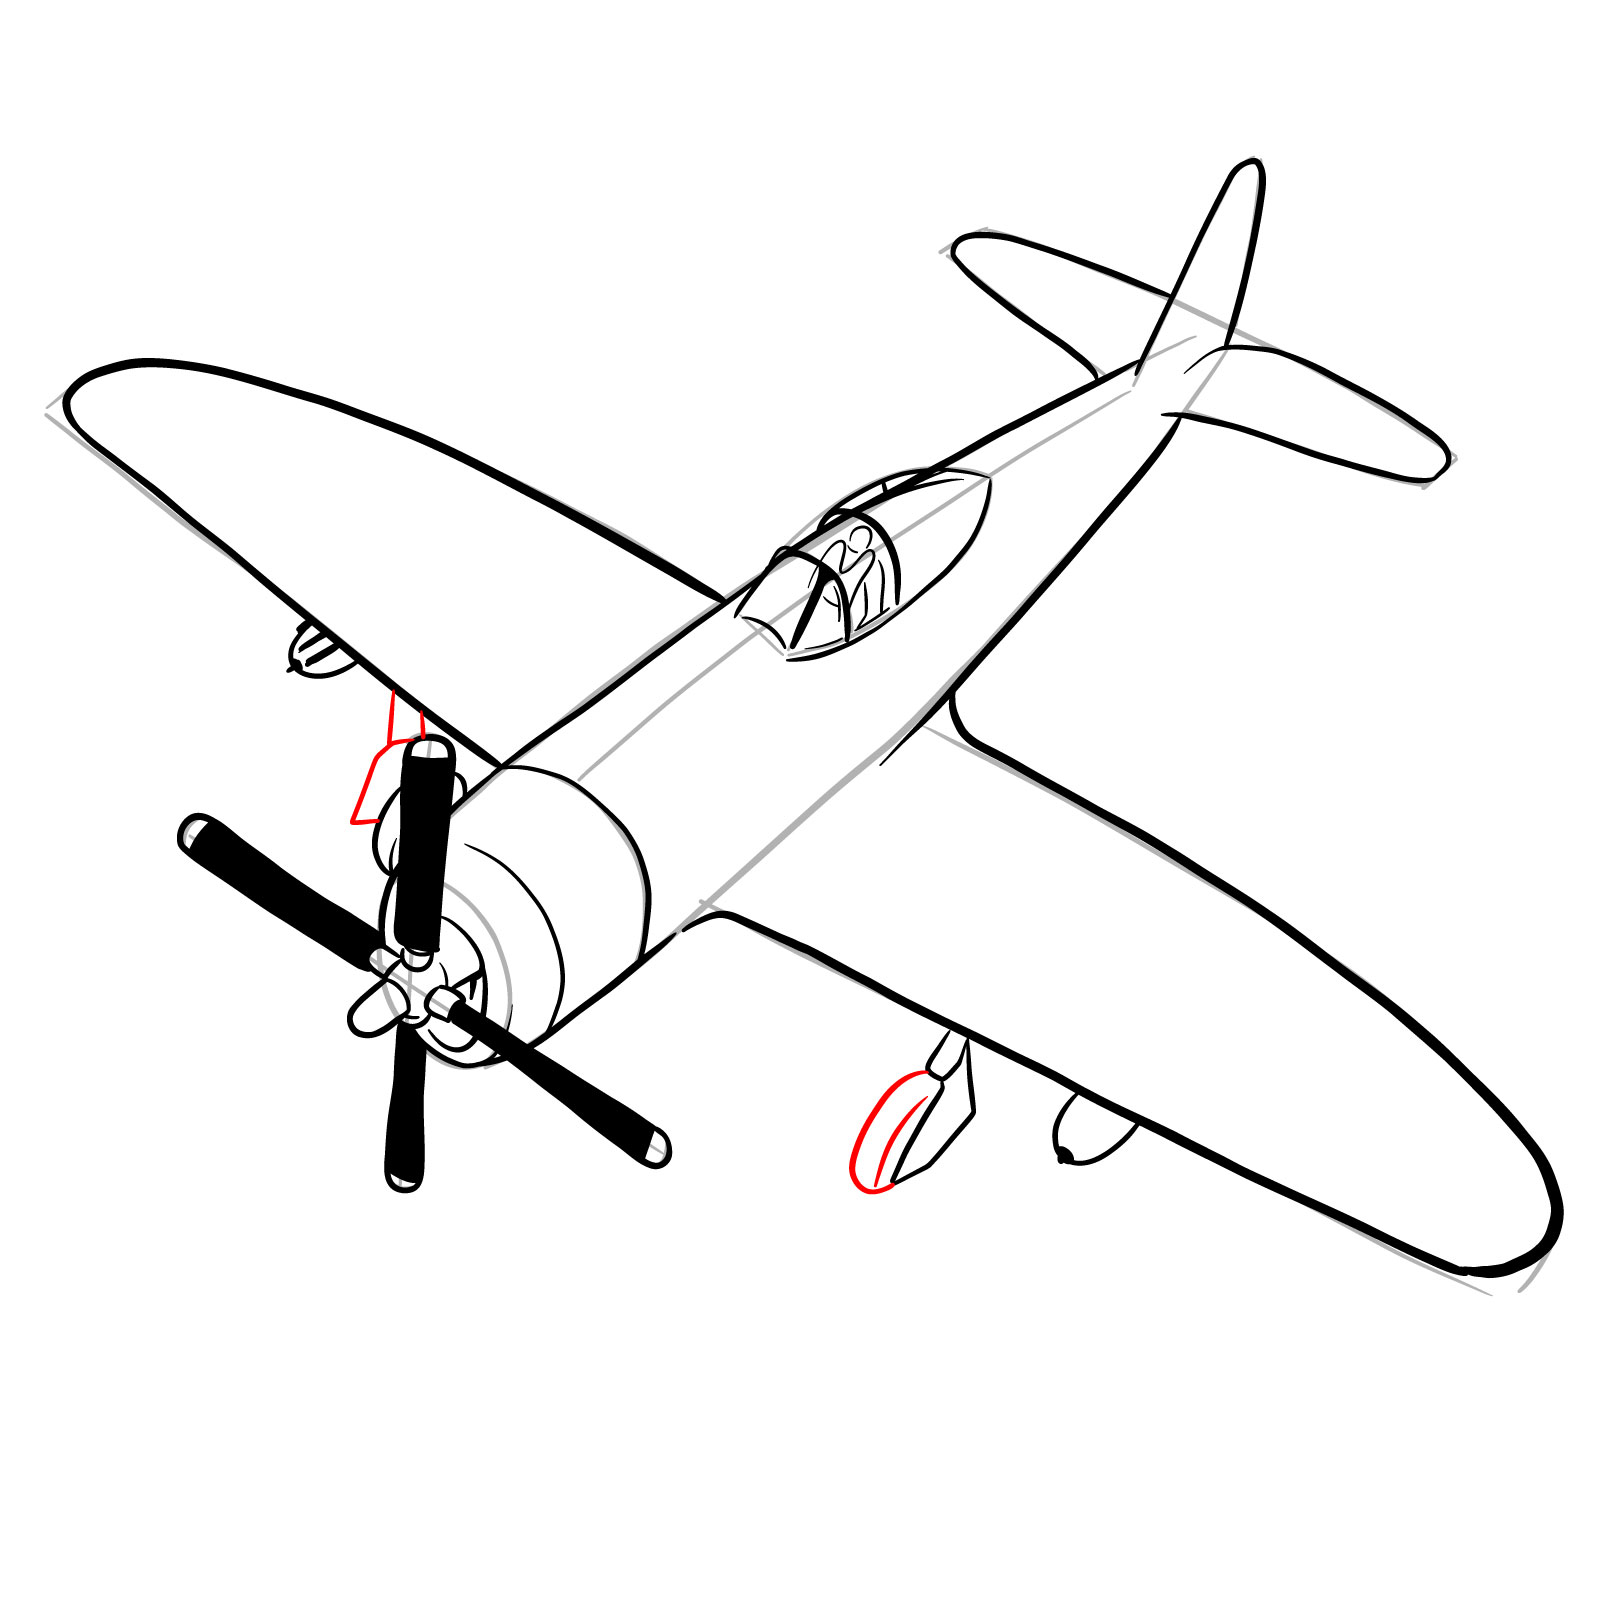 How to draw the Republic P-47 Thunderbolt - step 24